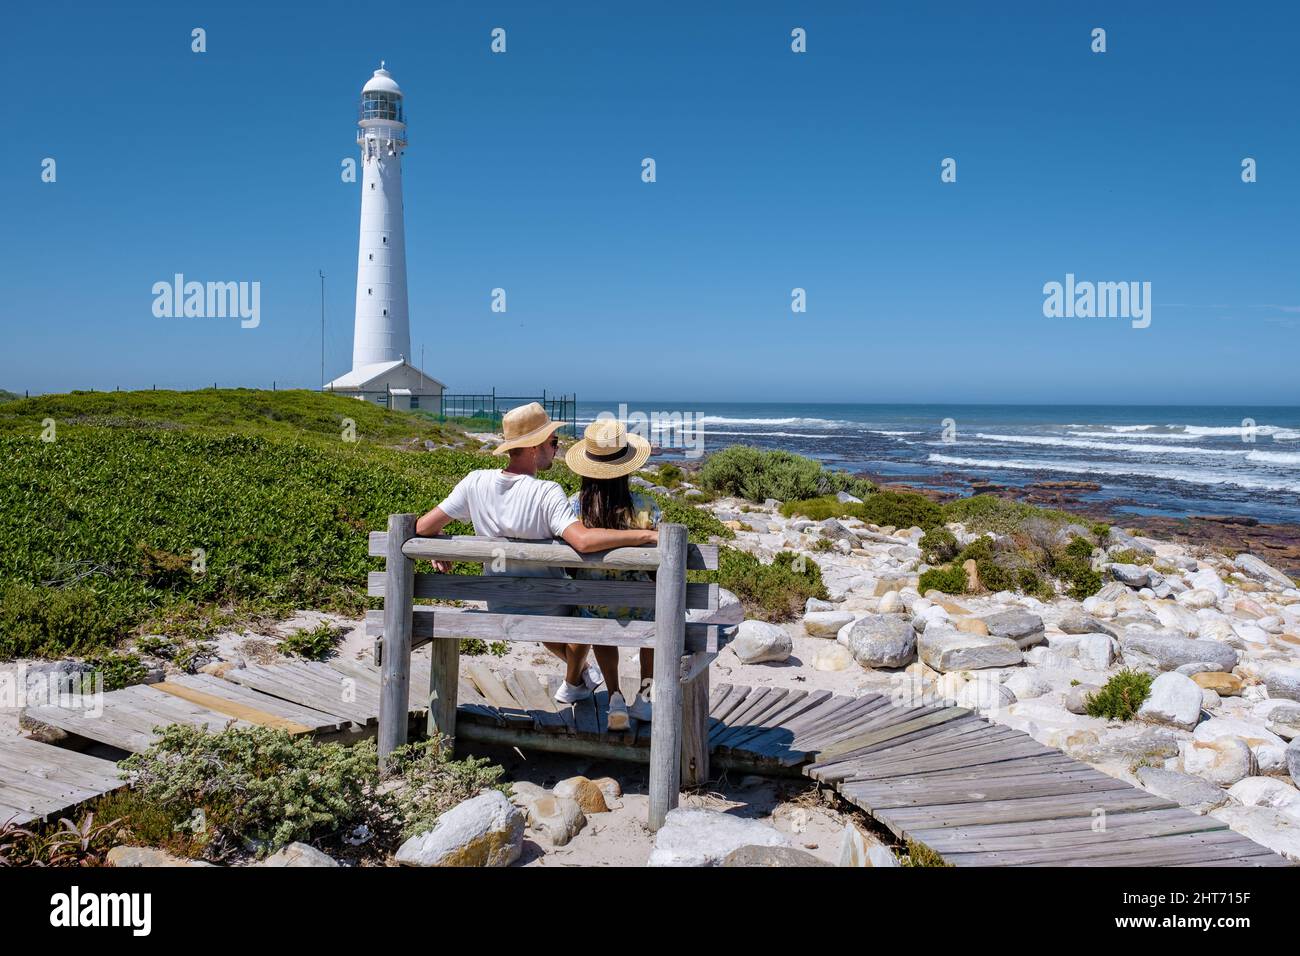 Couple man and women visiting the lighthouse of Slangkop Kommetjie Cape Town South Africa, The Slangkop lighthouse in the village of Kommetjie on the Cape Town Peninsula.  Stock Photo